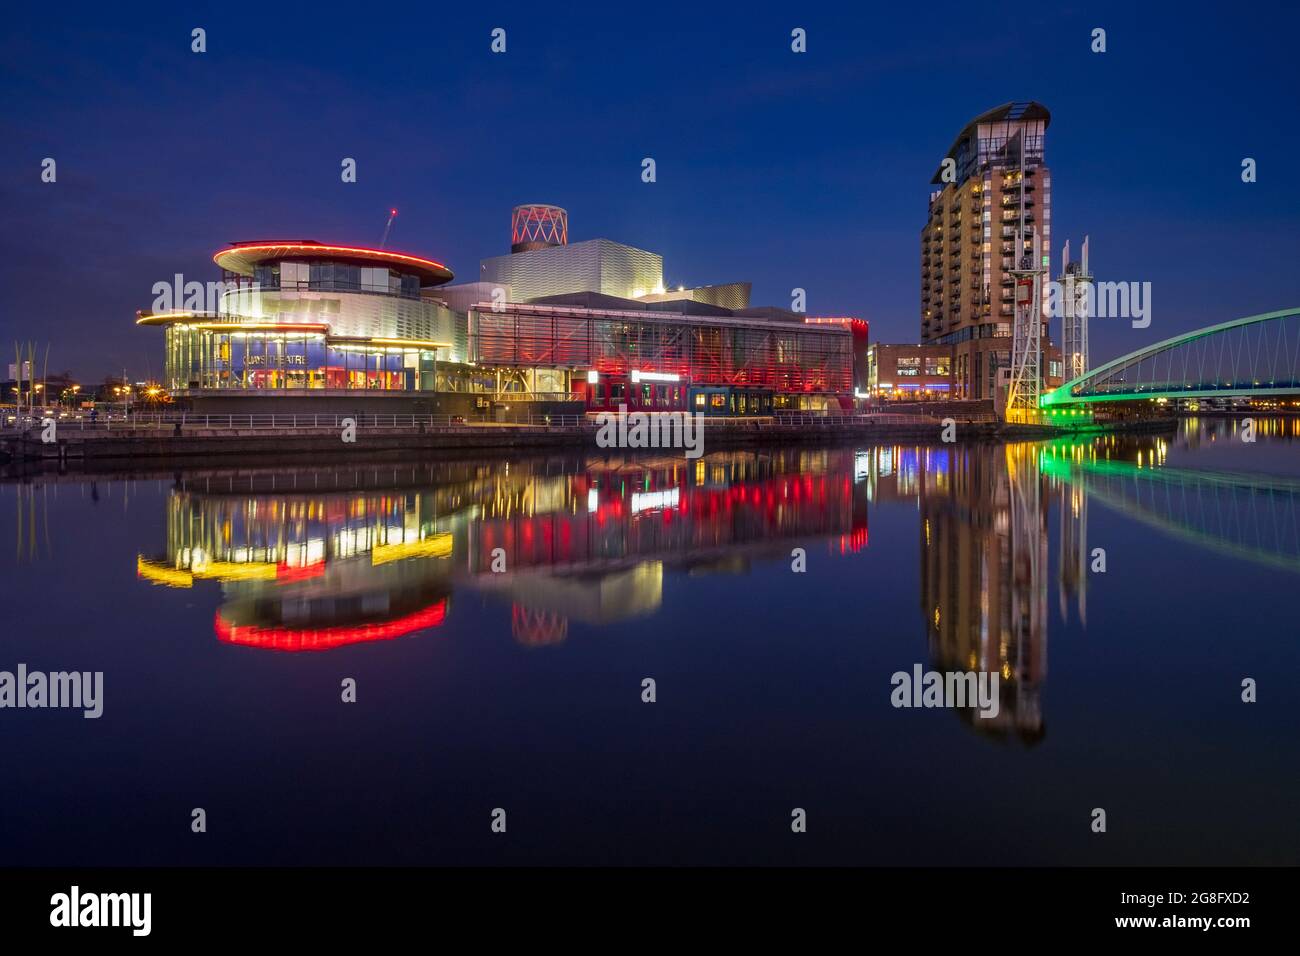 The Lowry Theatre at night, Salford Quays, Manchester, England, United Kingdom, Europe Stock Photo